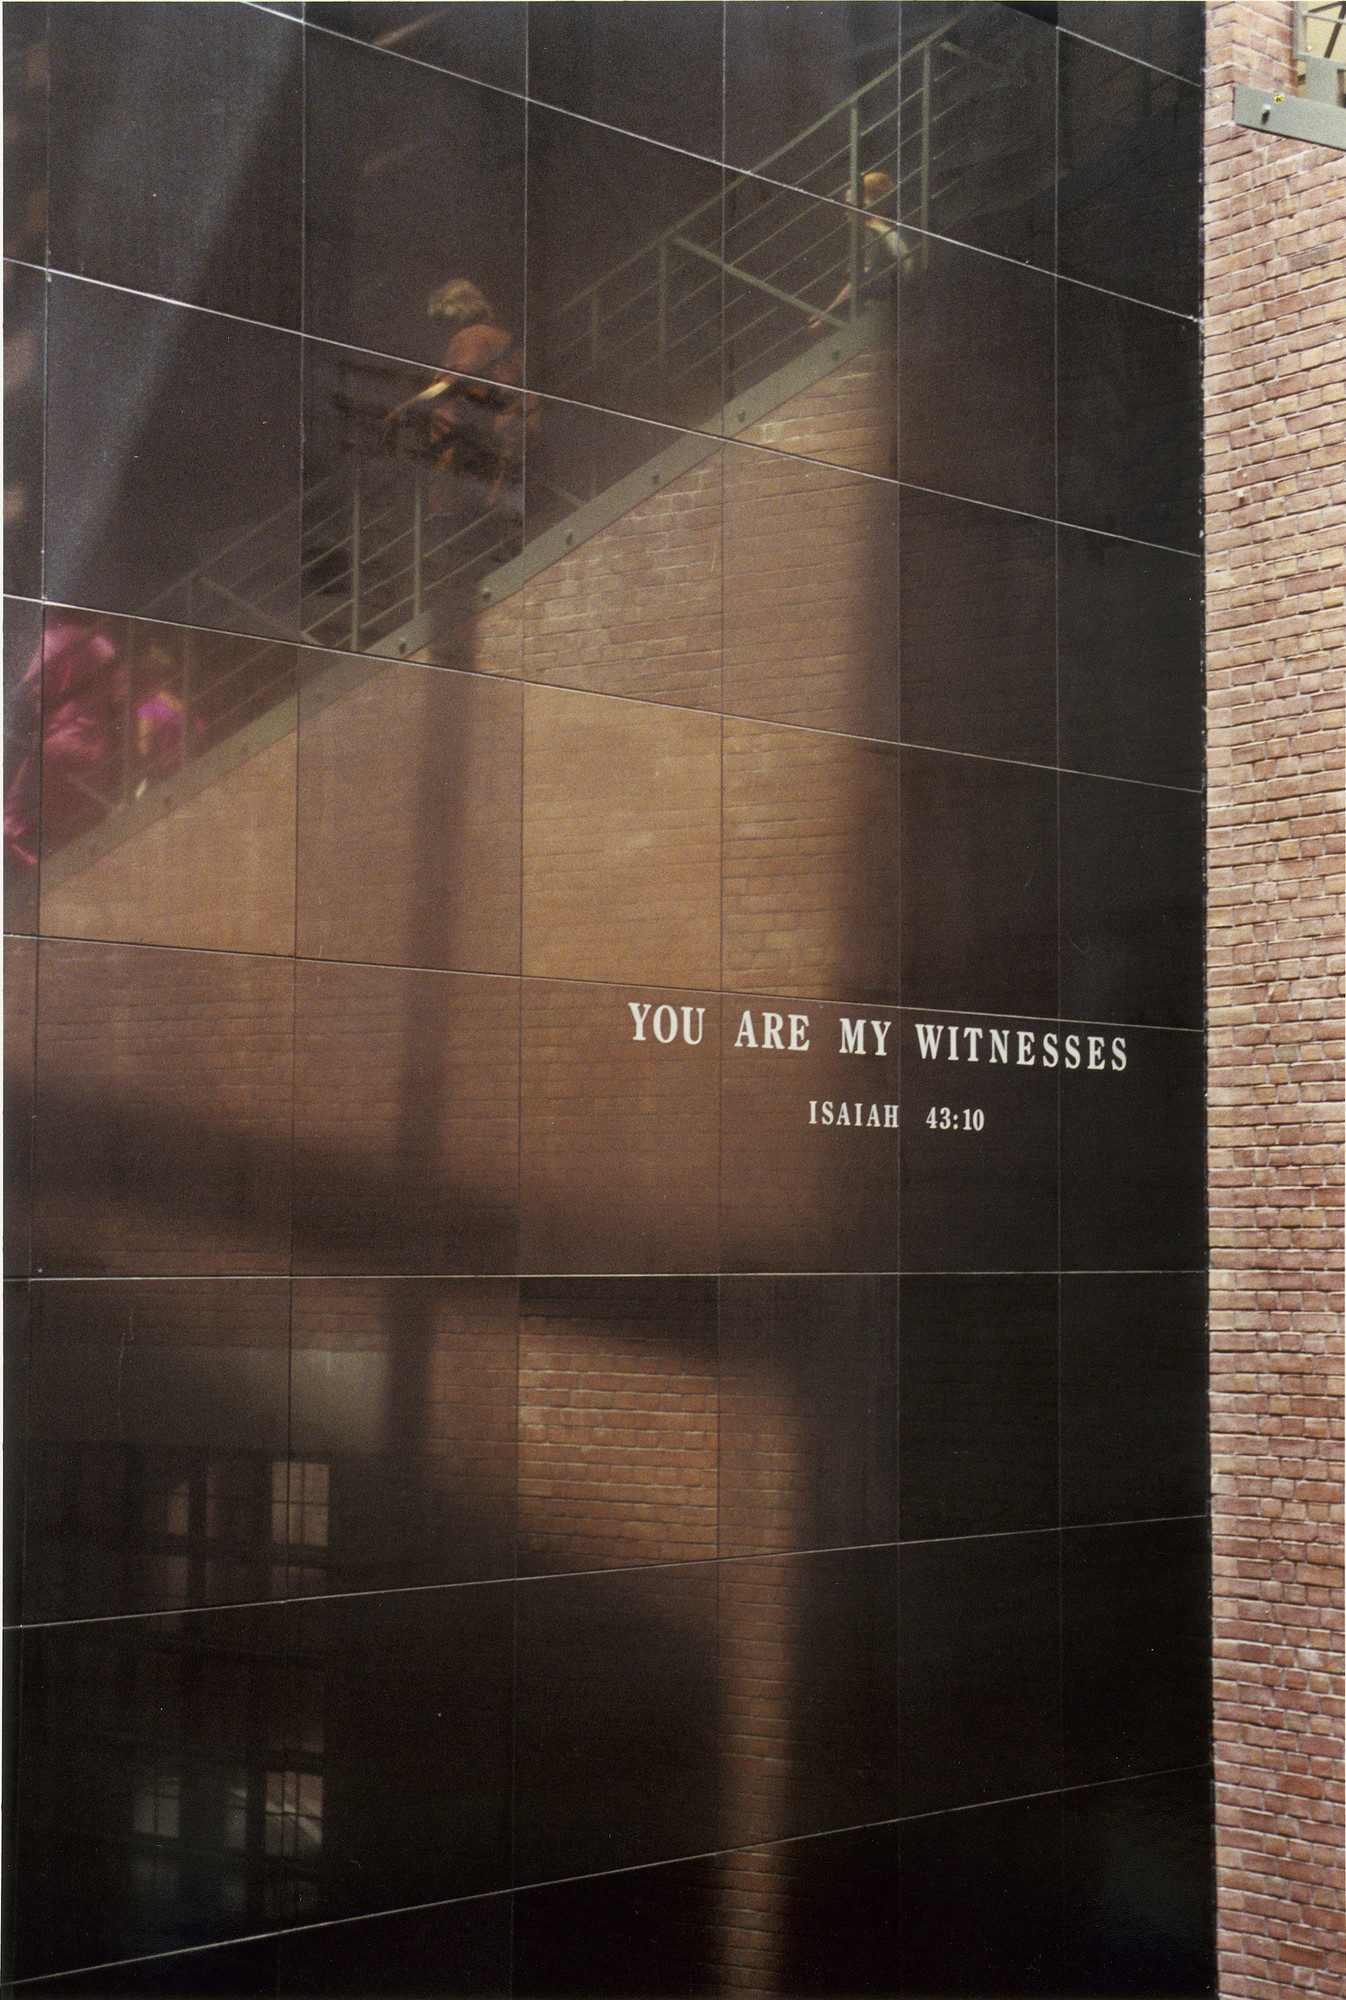 Black granite wall bearing the quote "You are my Witnesses" located in the Hall of Witness at the U.S. Holocaust Memorial Museum.

Reflected on the wall is the grand staircase with visitors.